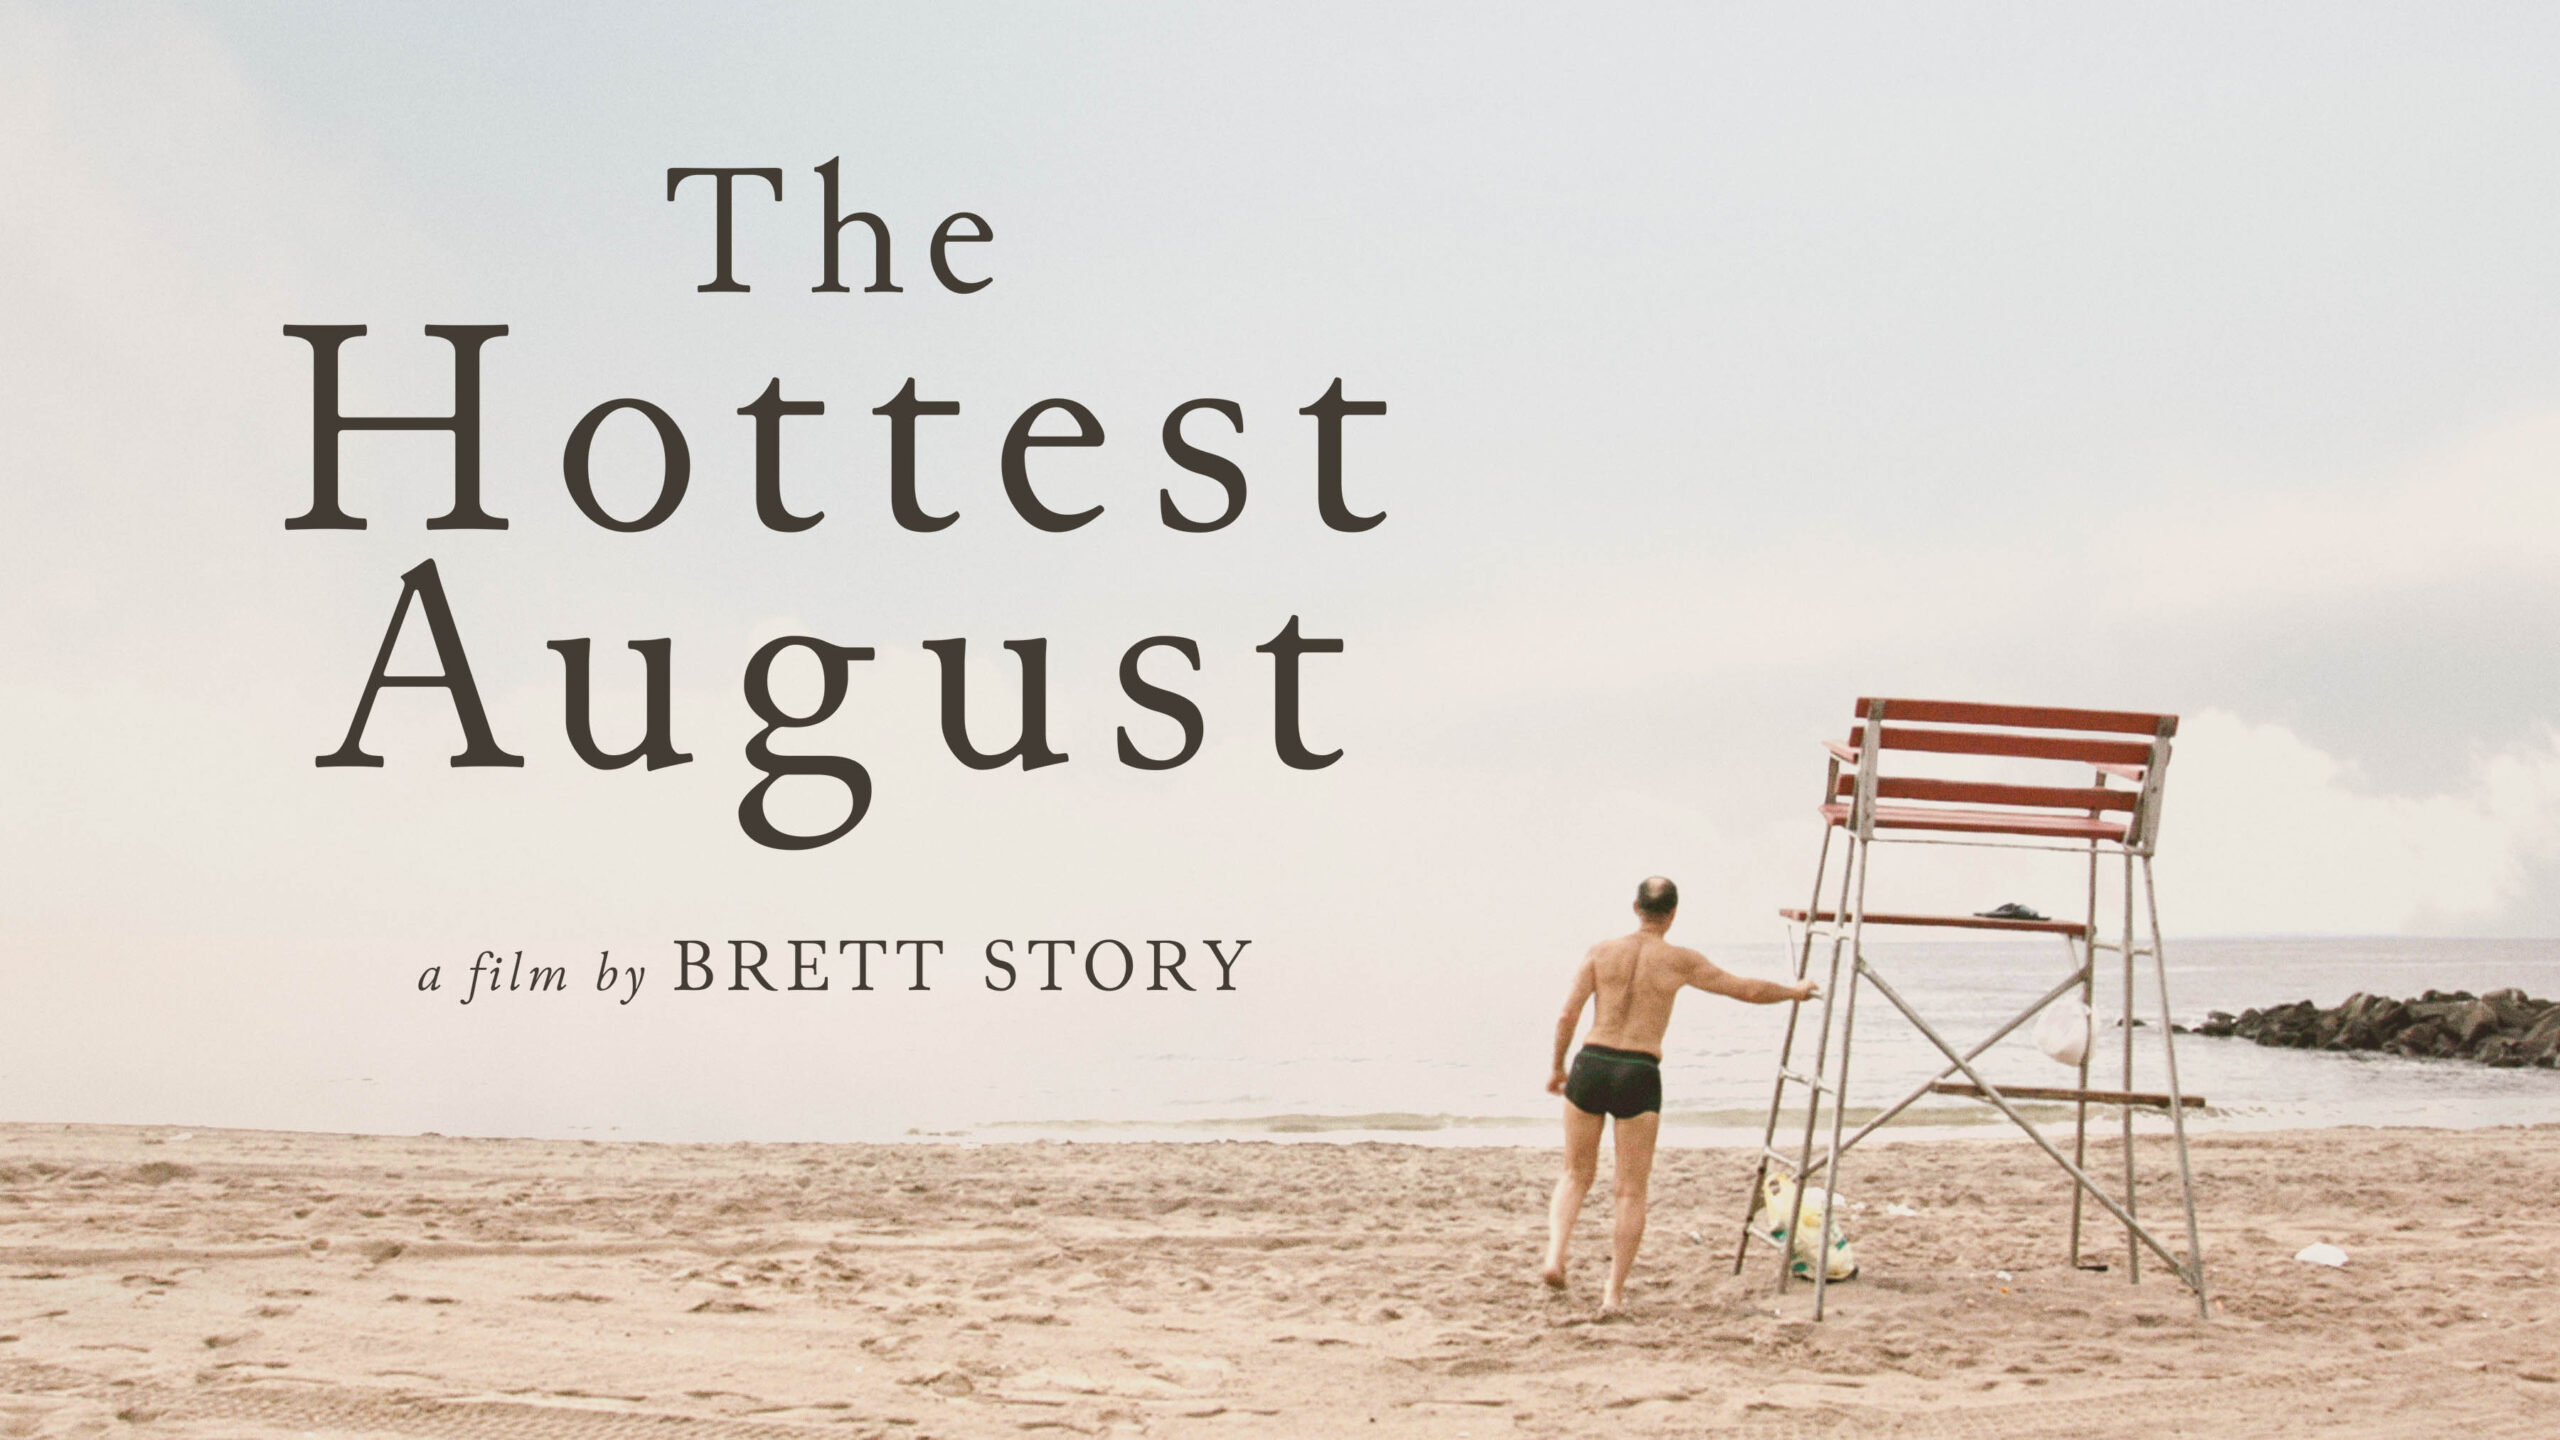 The Hottest August